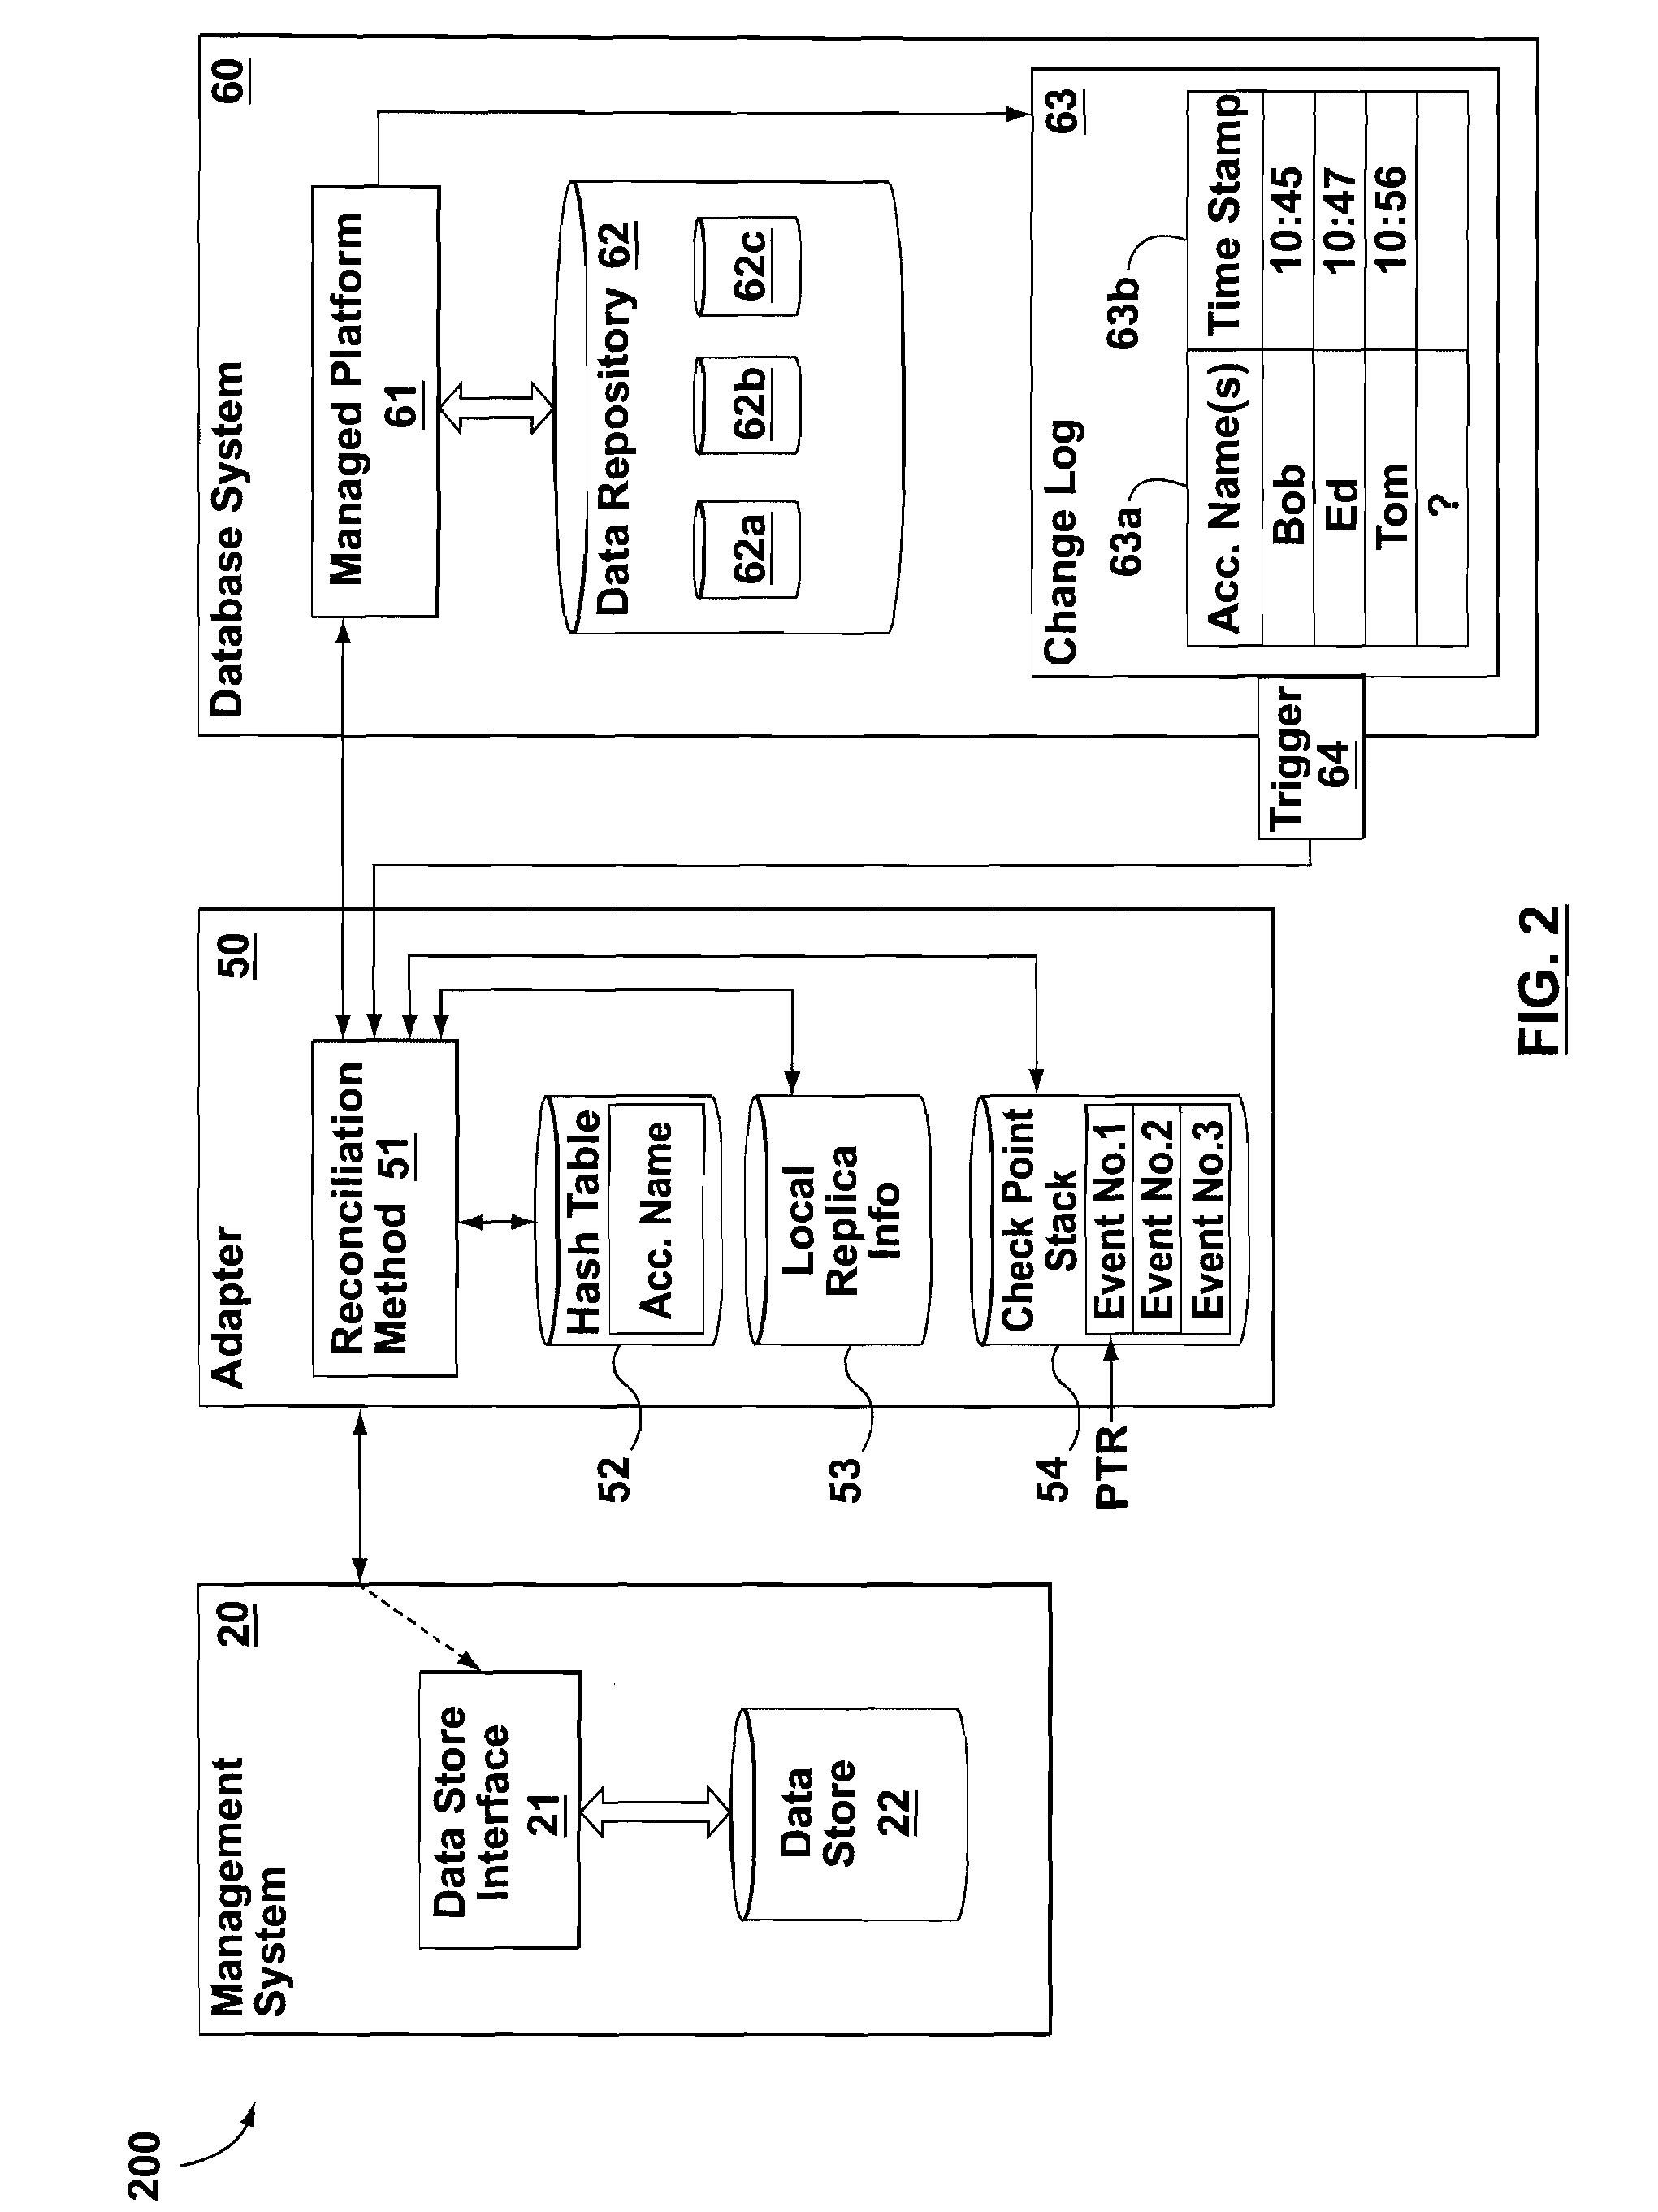 Systems, methods and software programs for data synchronization